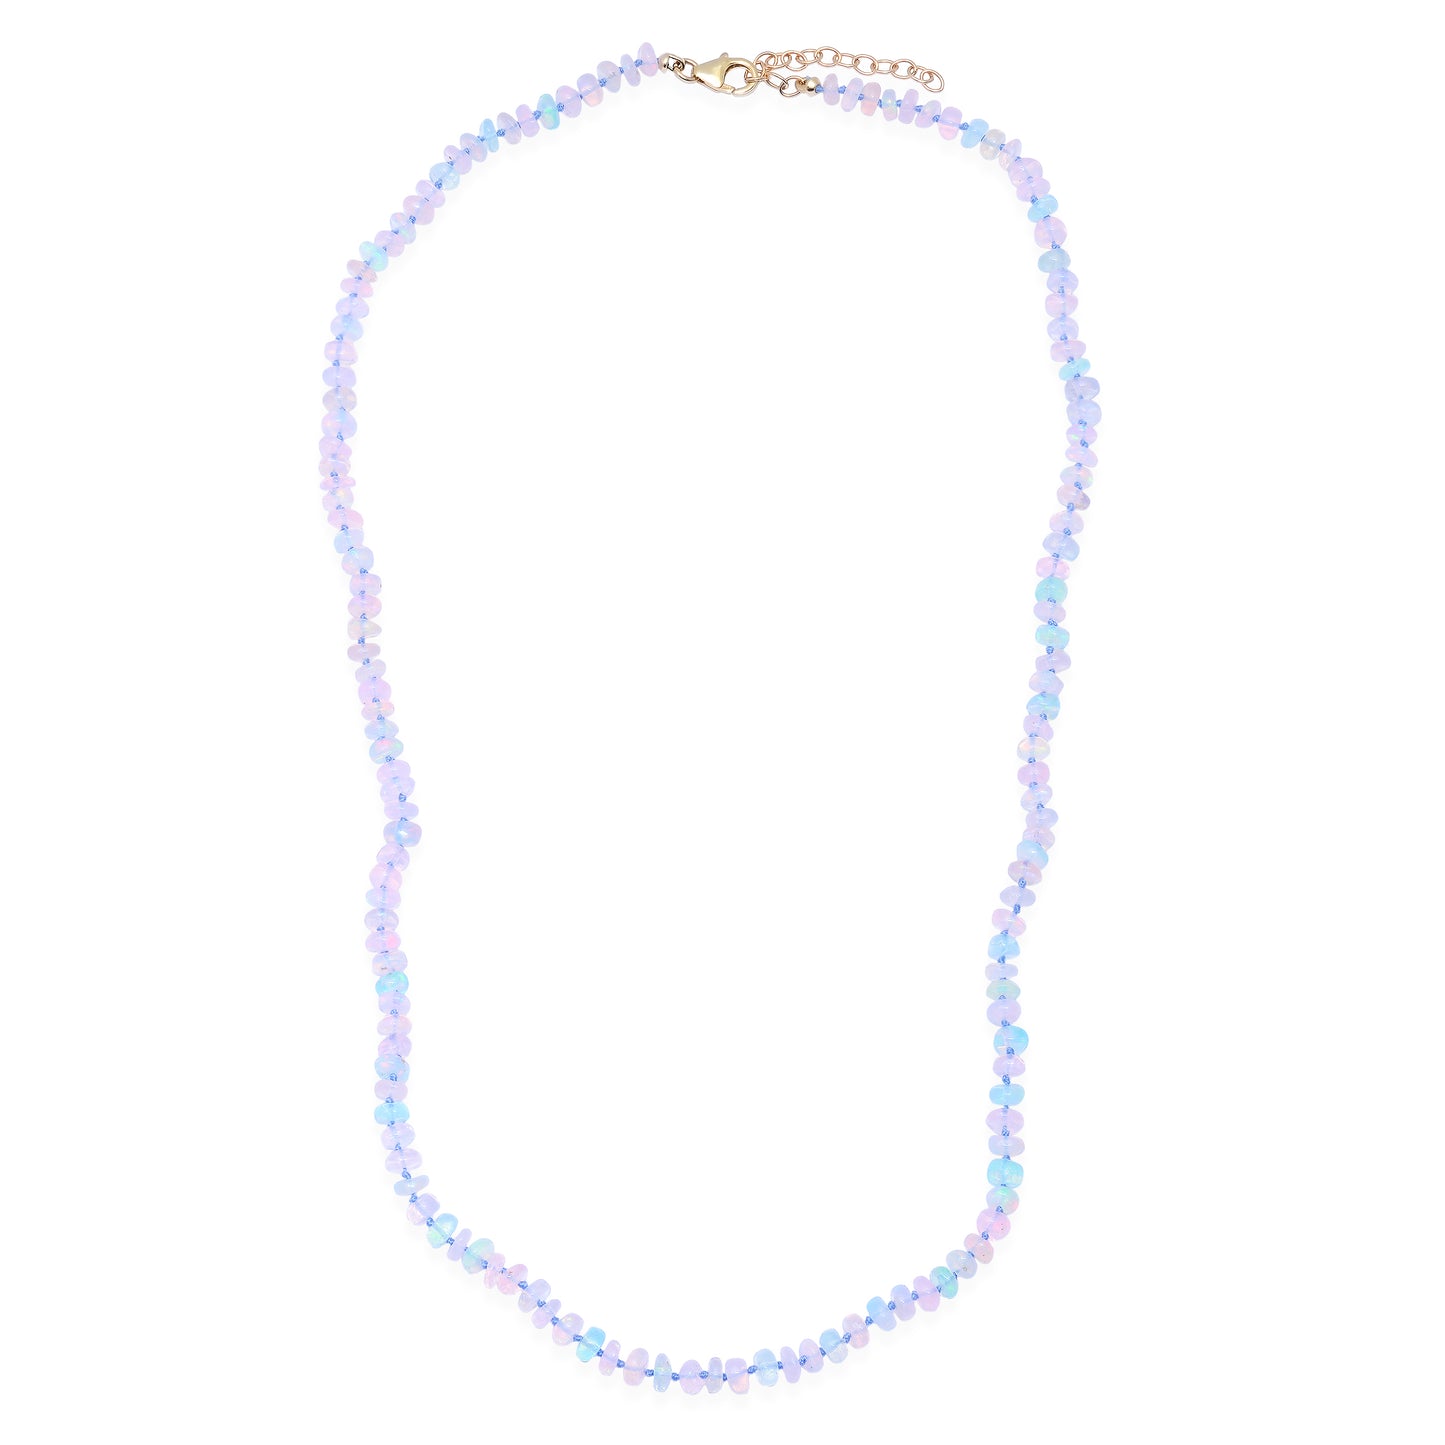 Violet Opal Beaded Necklace with Cornflower Blue Silk Thread